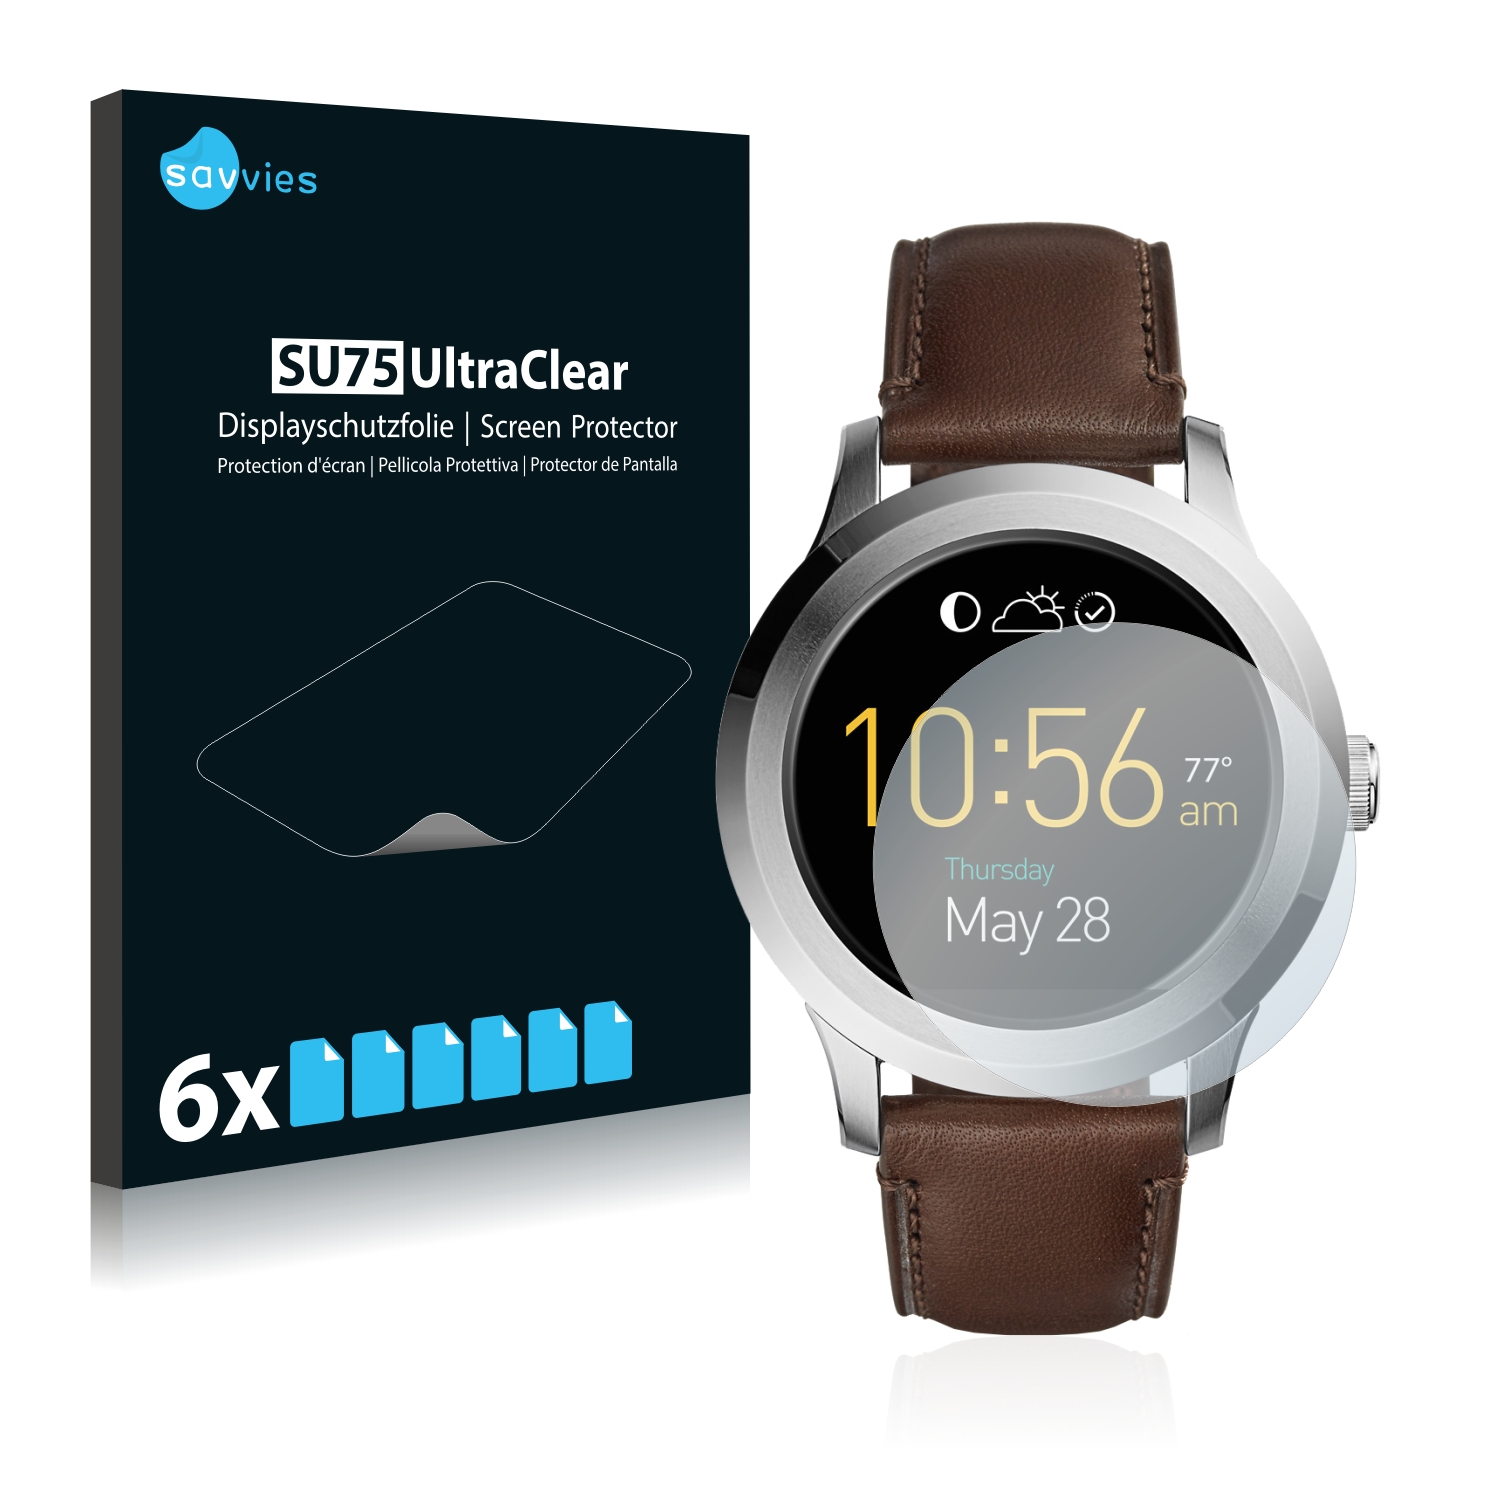 fossil q founder 2.0